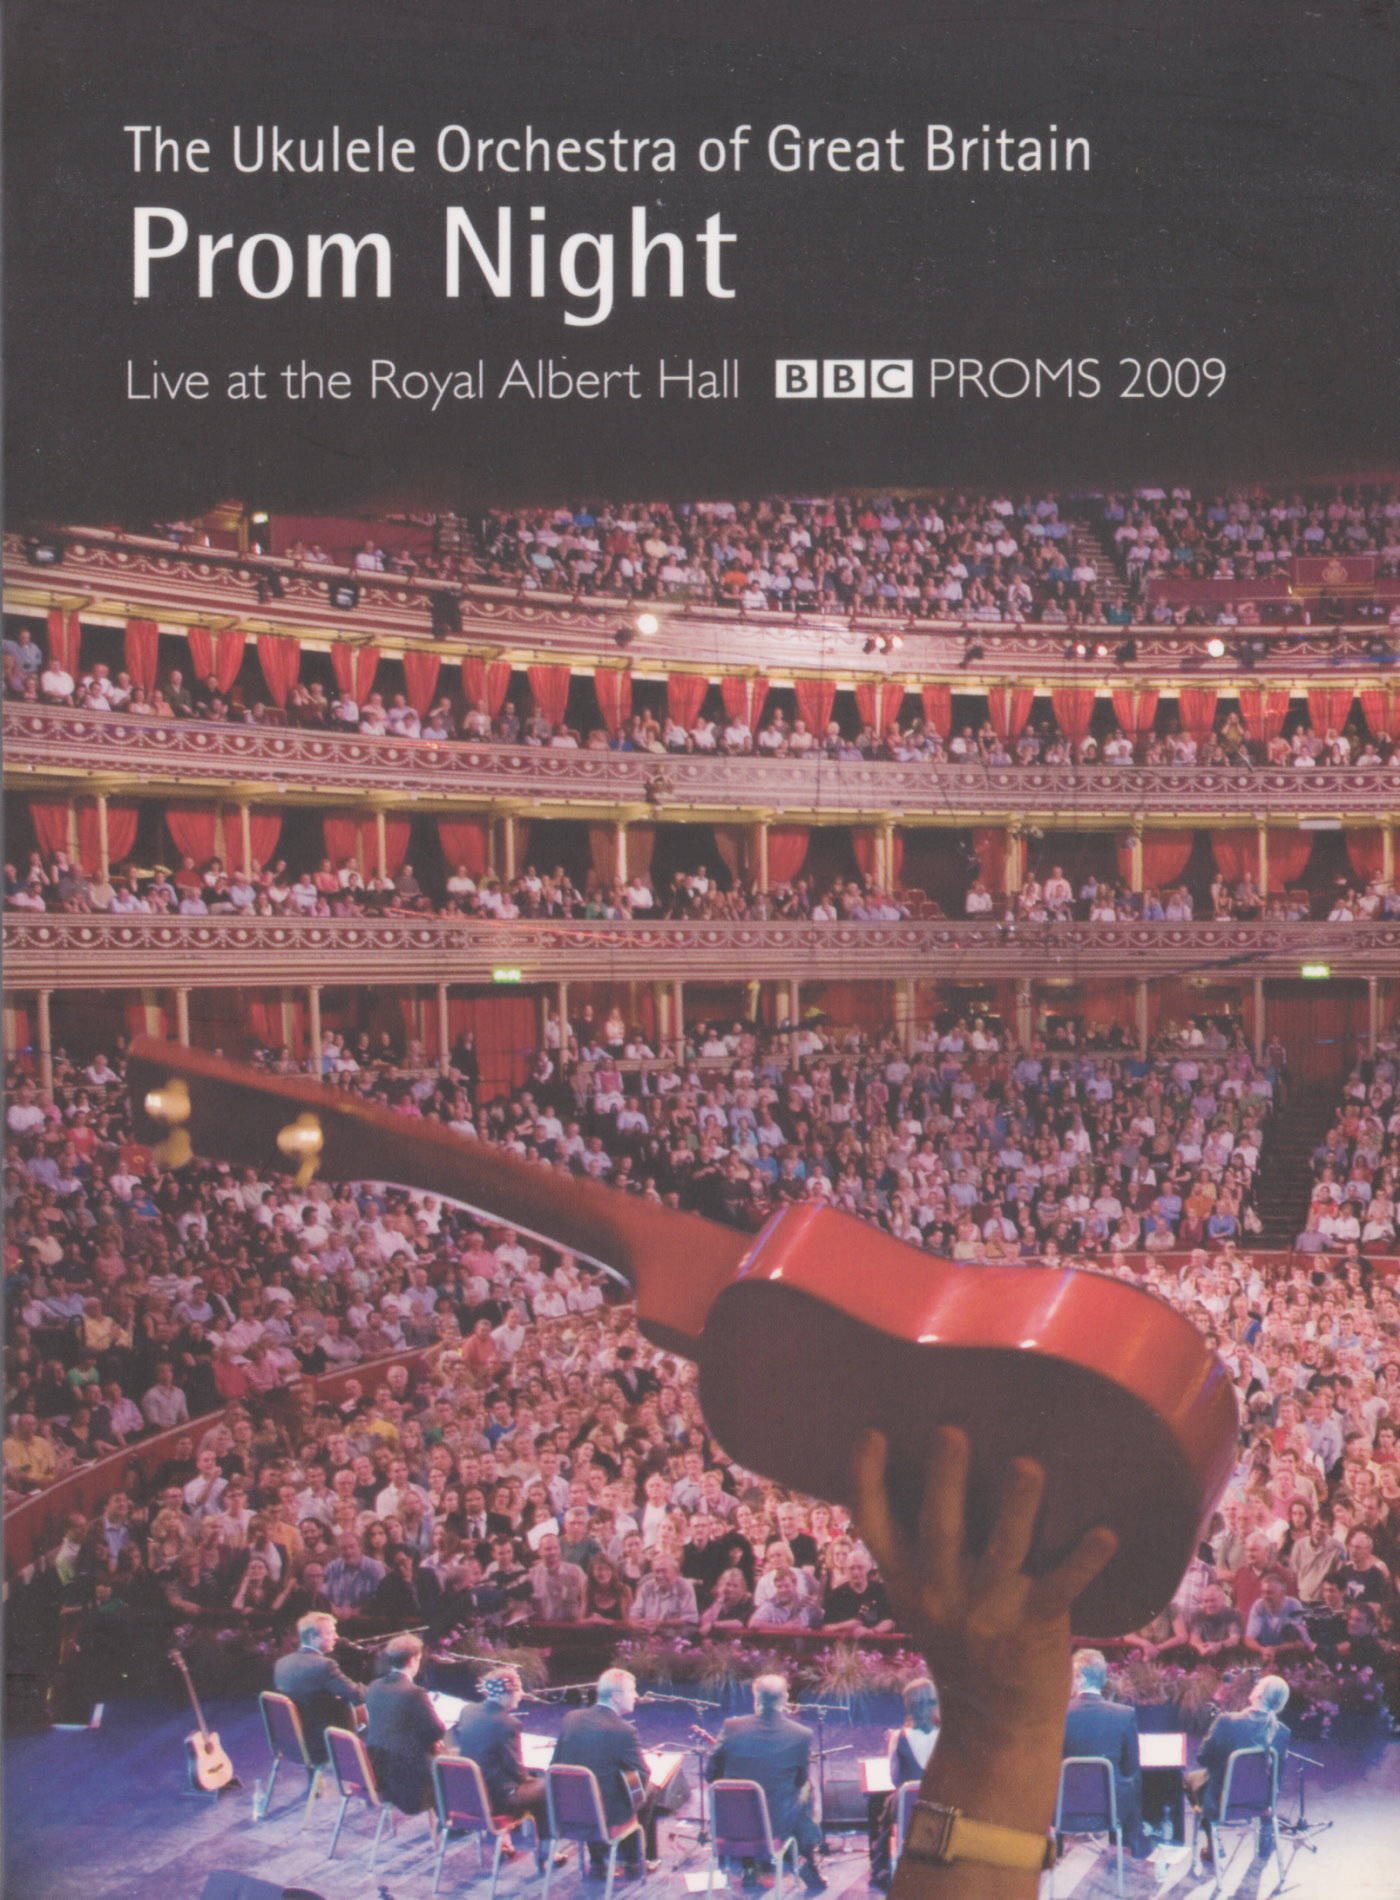 Cover - The Ukulele Orchestra of Great Britain - Prom Night 2009.jpg